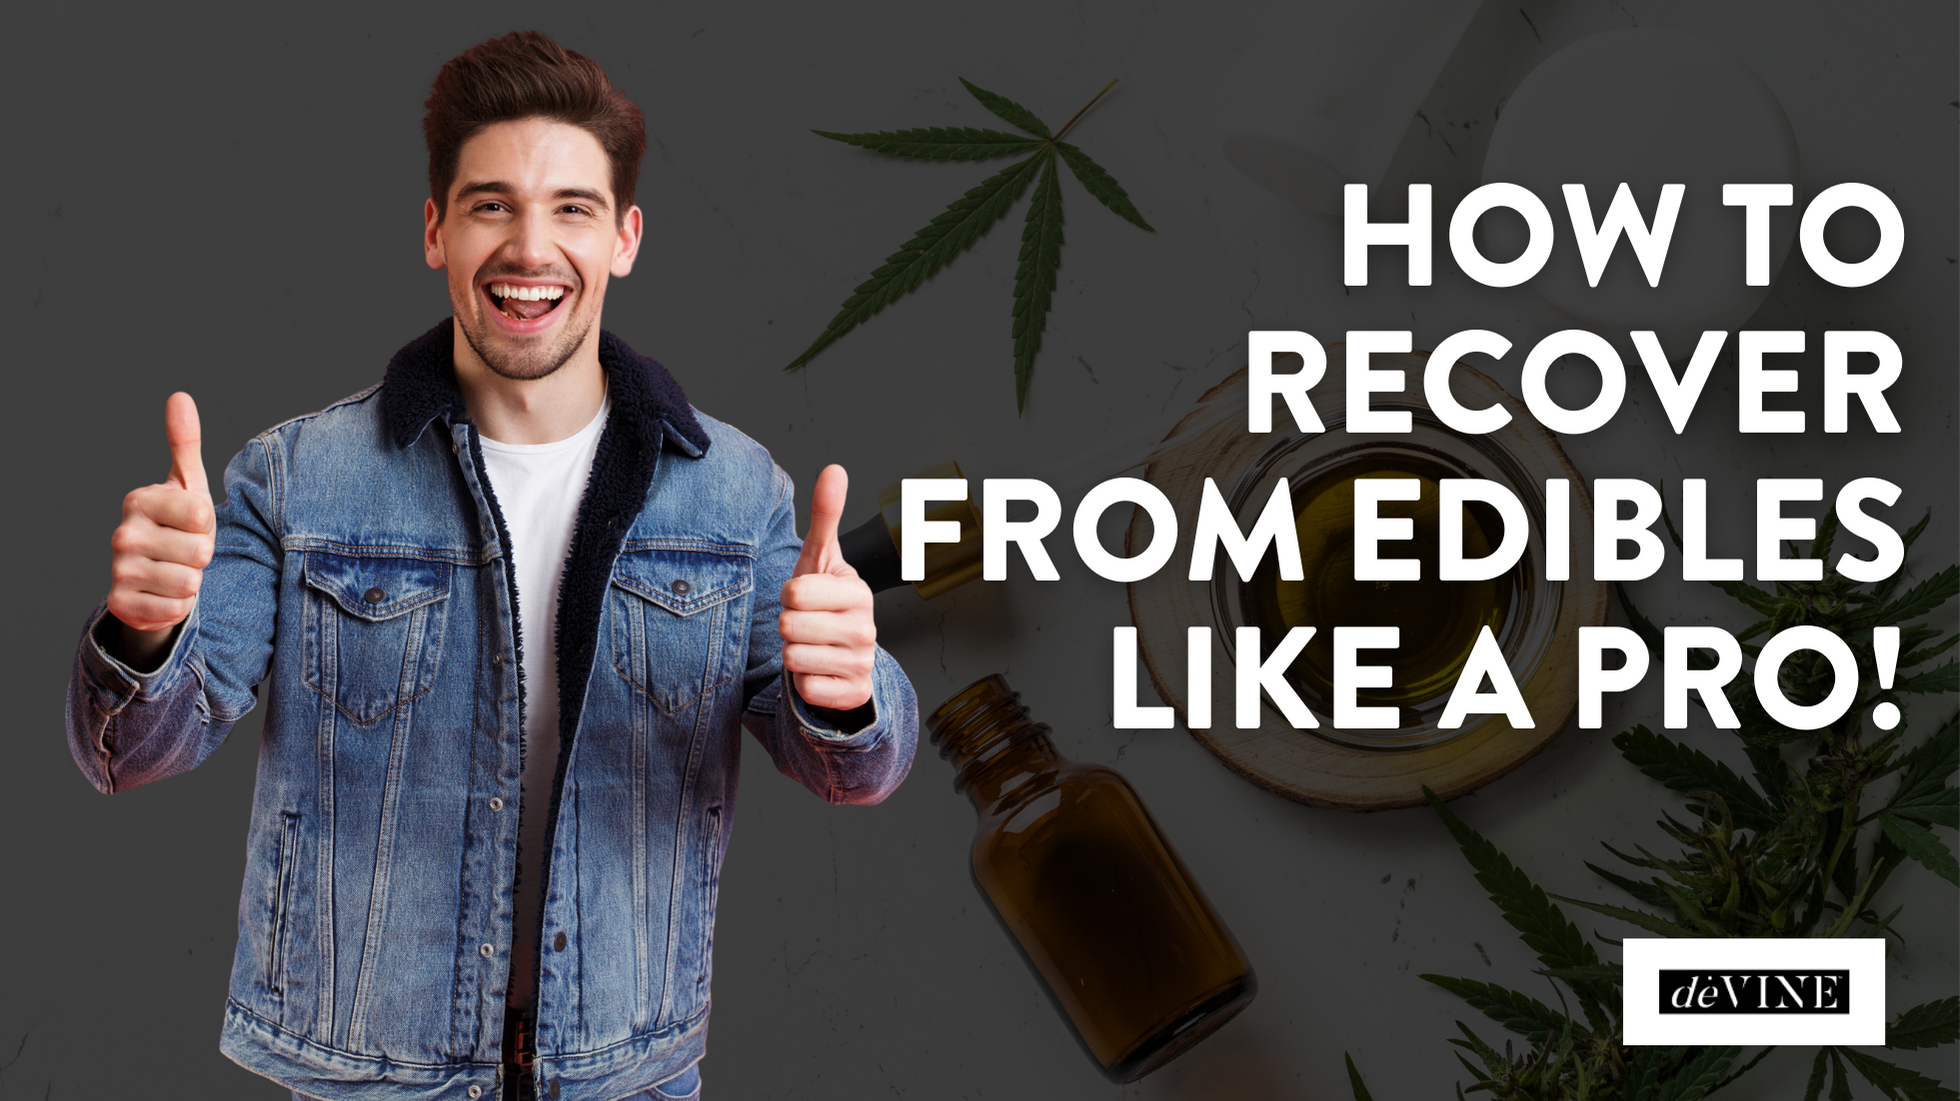 How to Recover from Edibles